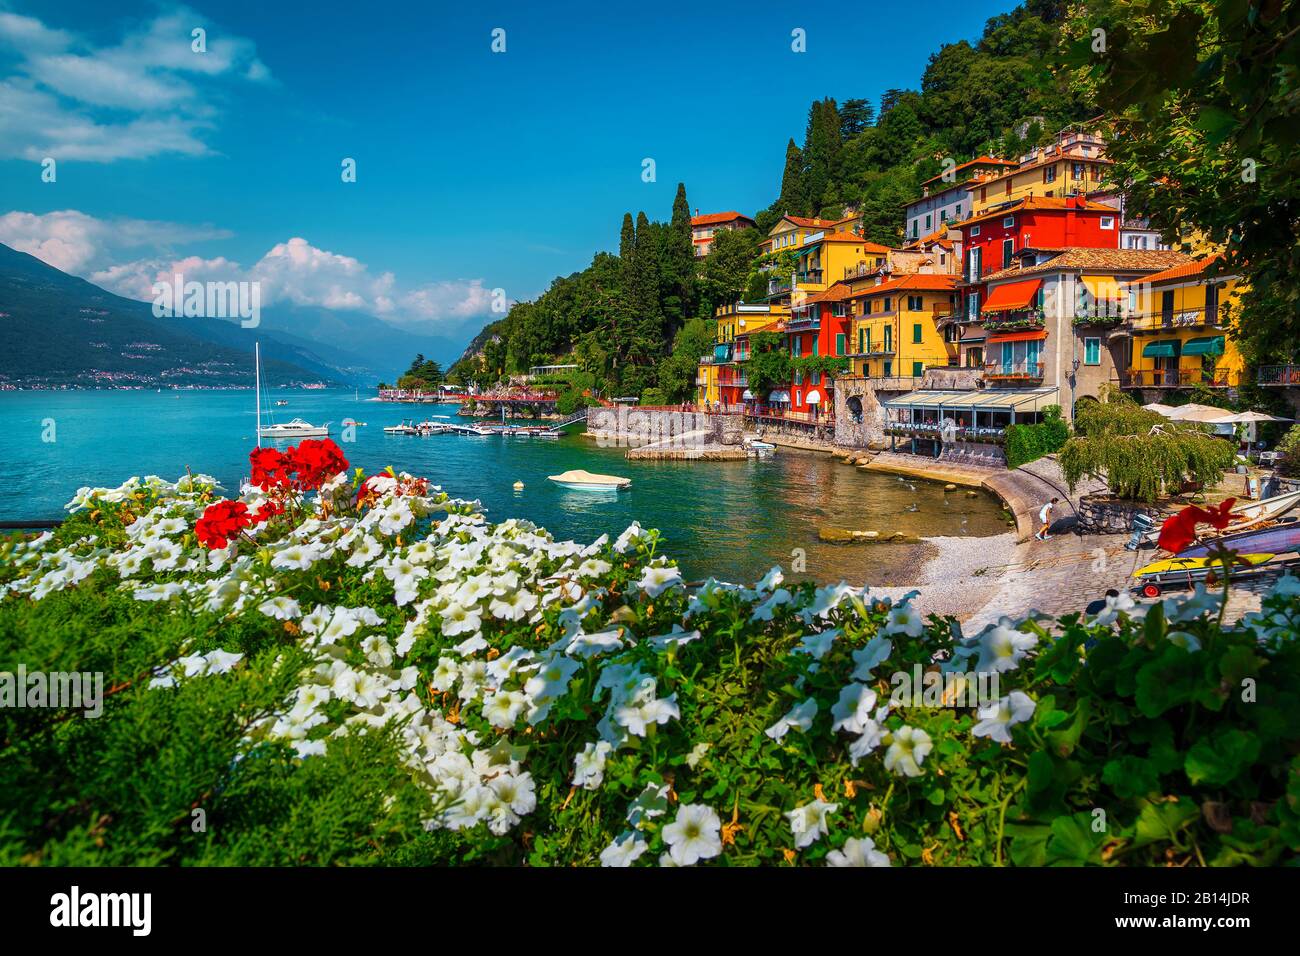 Flowery garden on the lake shore and stunning view with colorful buildings. Moored boats and motorboats in the bay, lake Como, Varenna, Italy, Europe Stock Photo